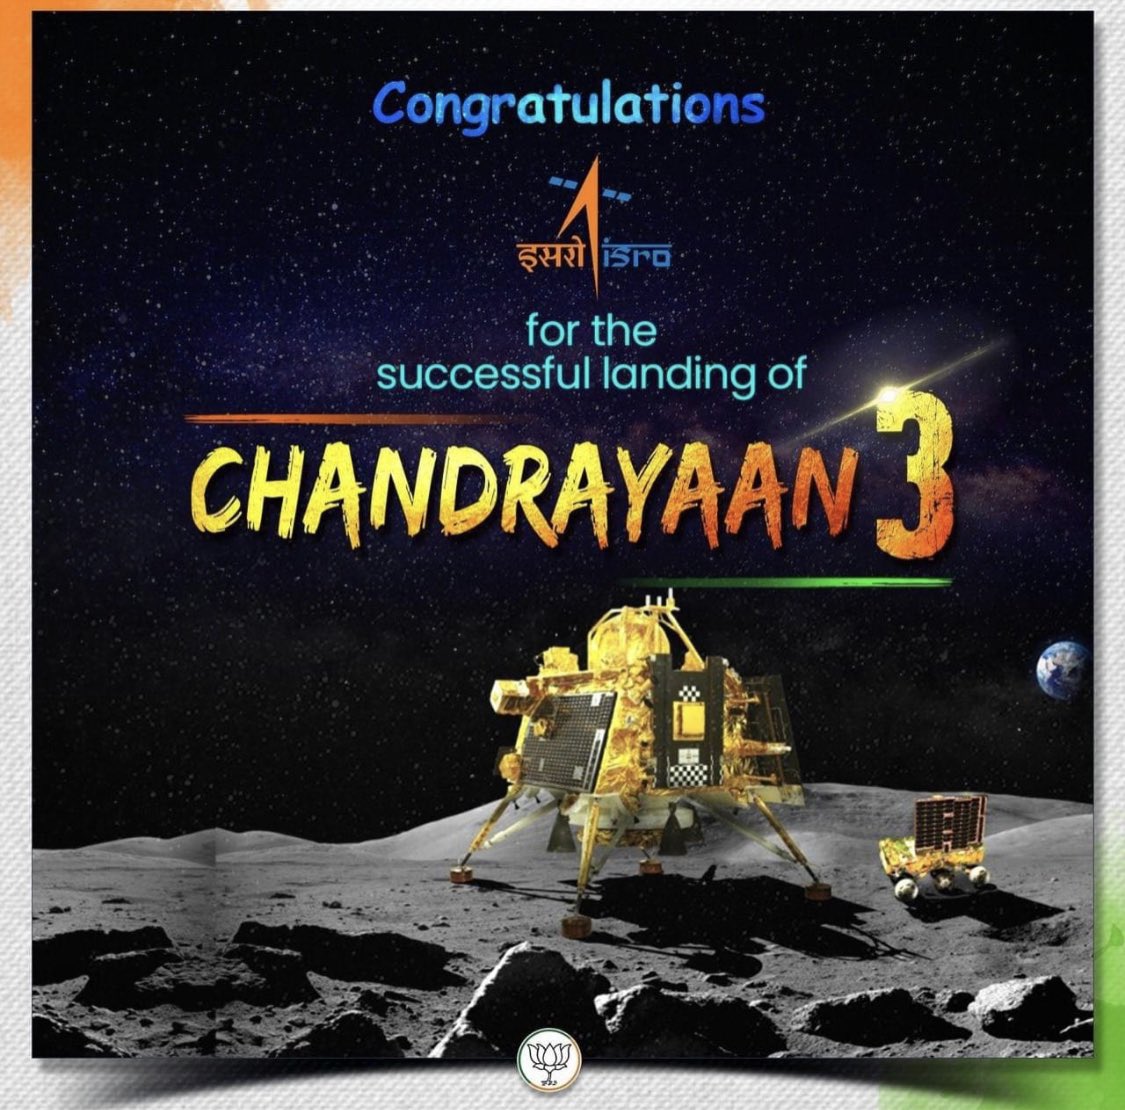 Congratulations @isro for the successful #softlanding of #Chandrayaan3 Great achievement by all the scientists to be the first on the #southpole of the #Moon